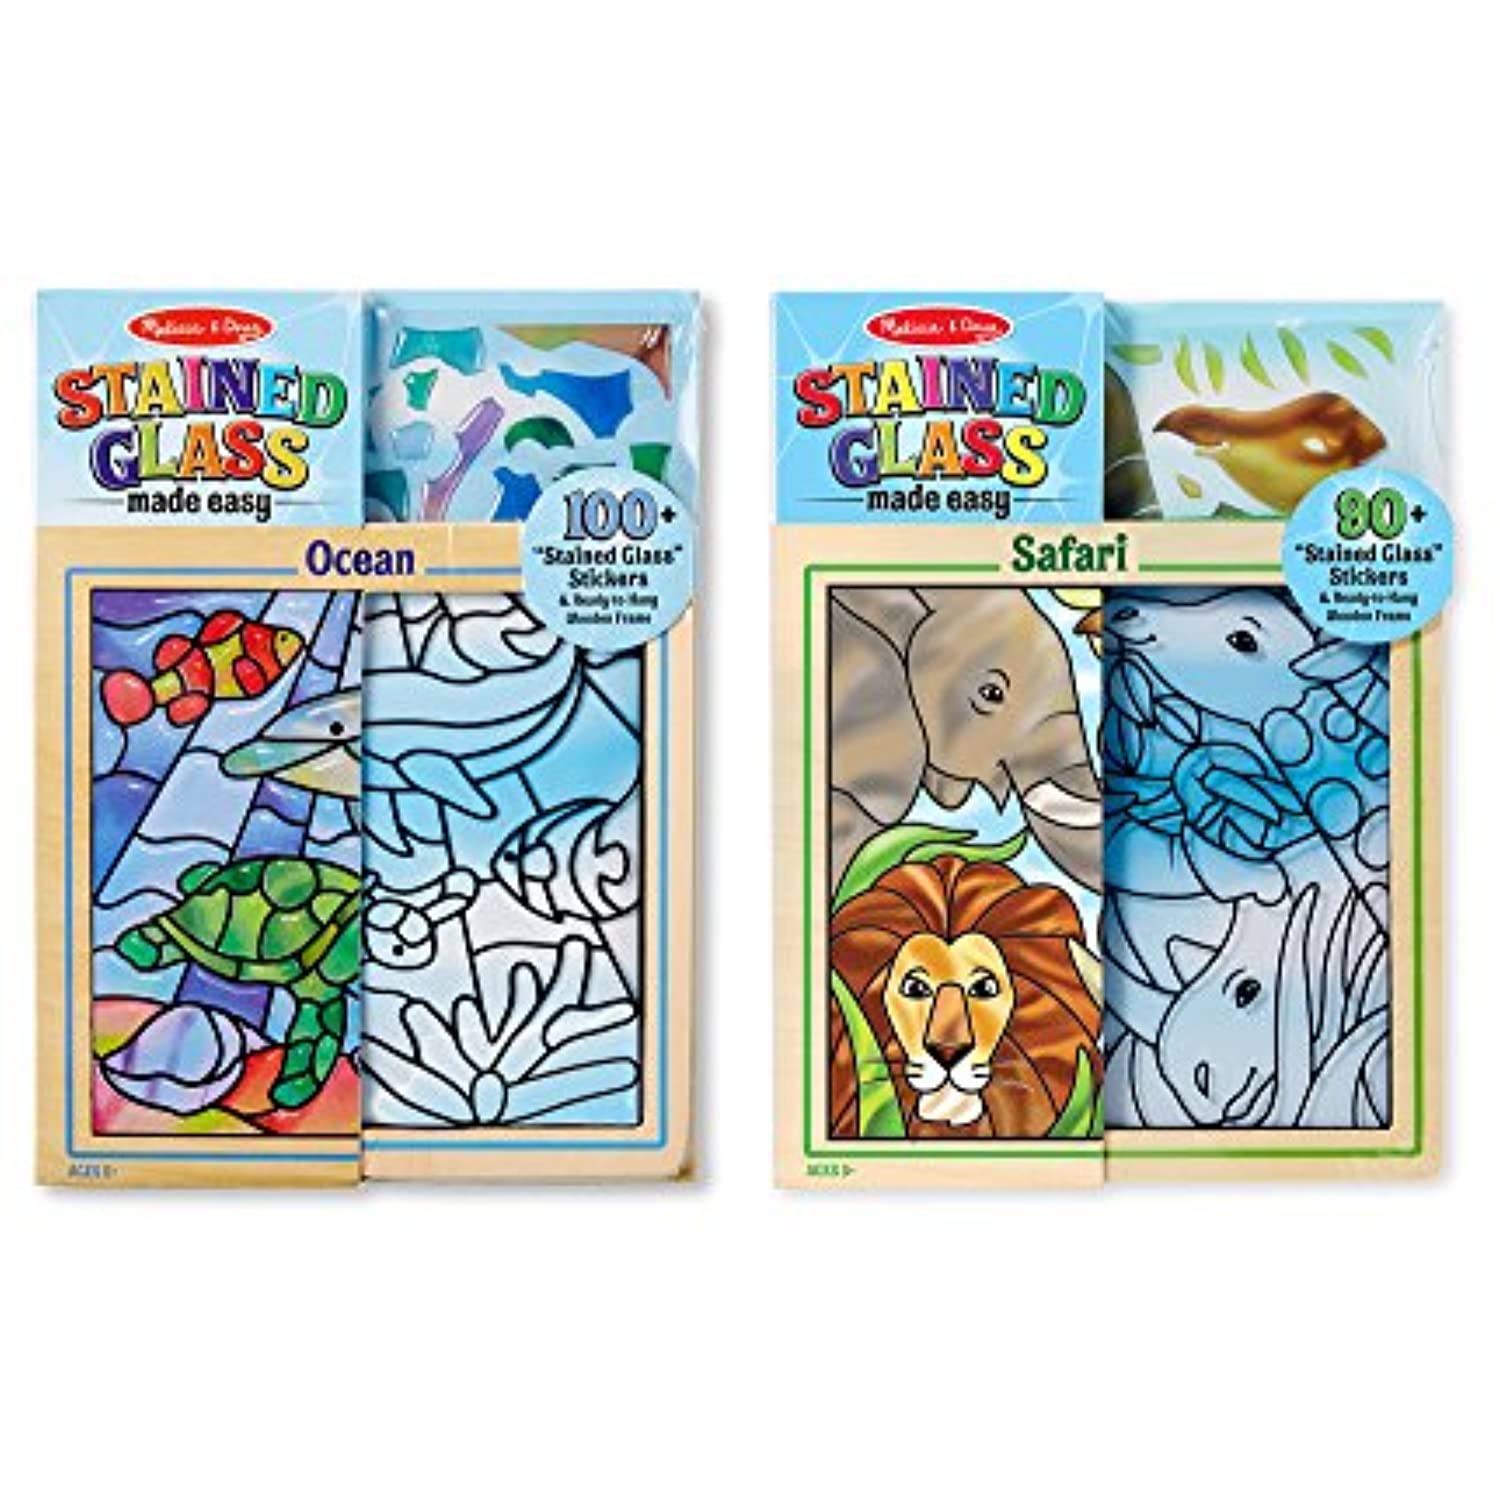 Melissa & Doug Stained Glass Made Easy Activity Kits Set: Ocean and Safari - 190+ Stickers, 2 Frames